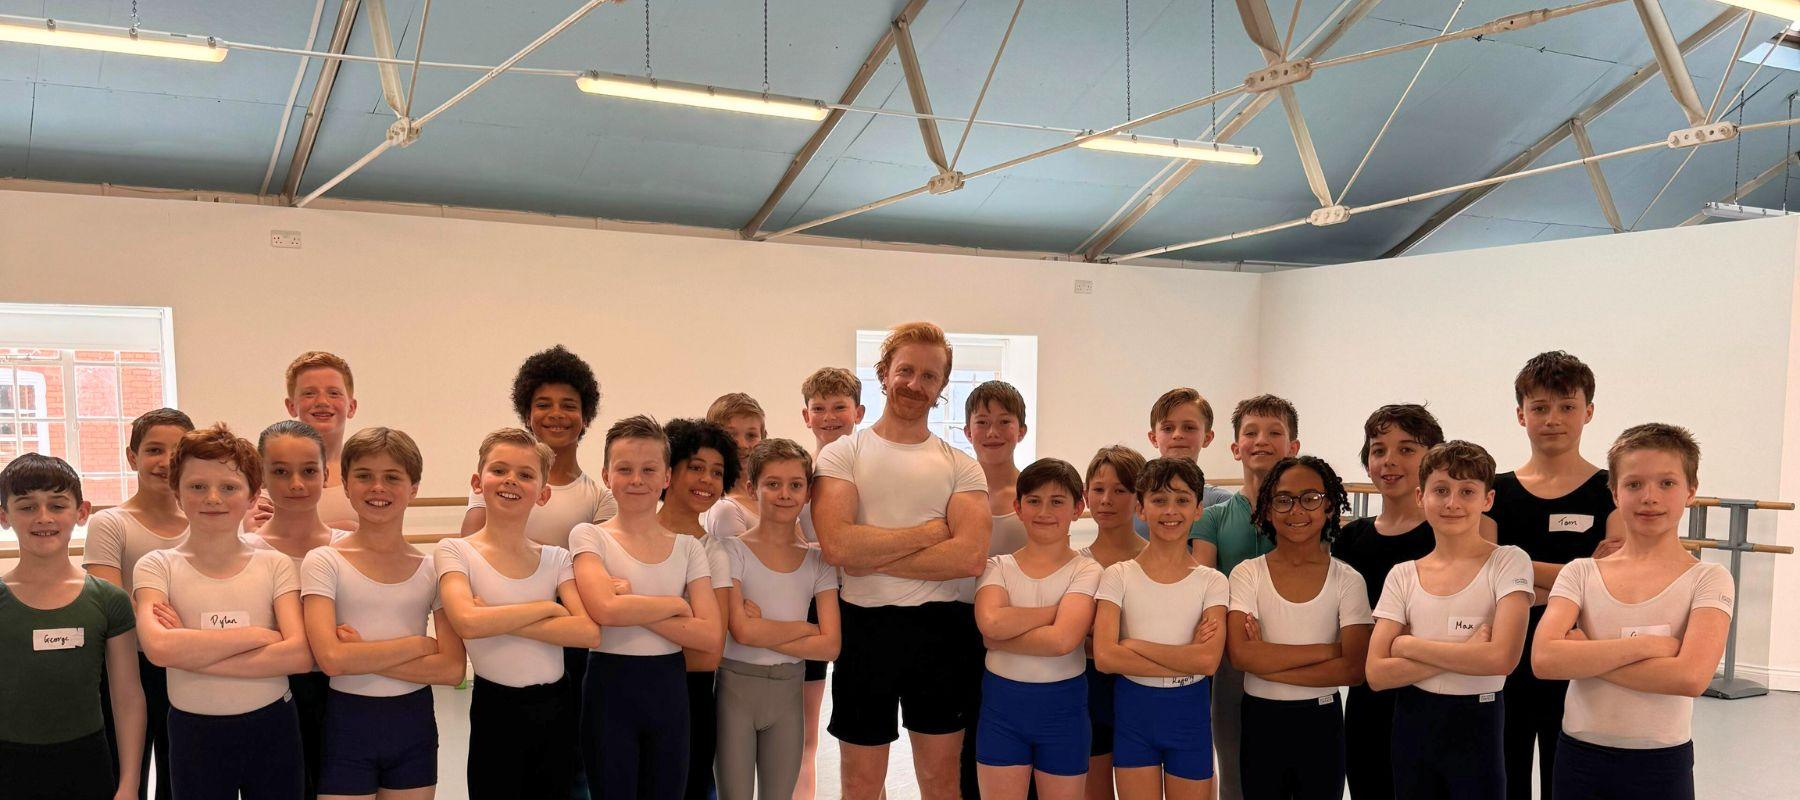 steven McRae, Principal Dancer at the royal Ballet with a Group of male dancers dressed in dancewear from Boys Do Ballet 